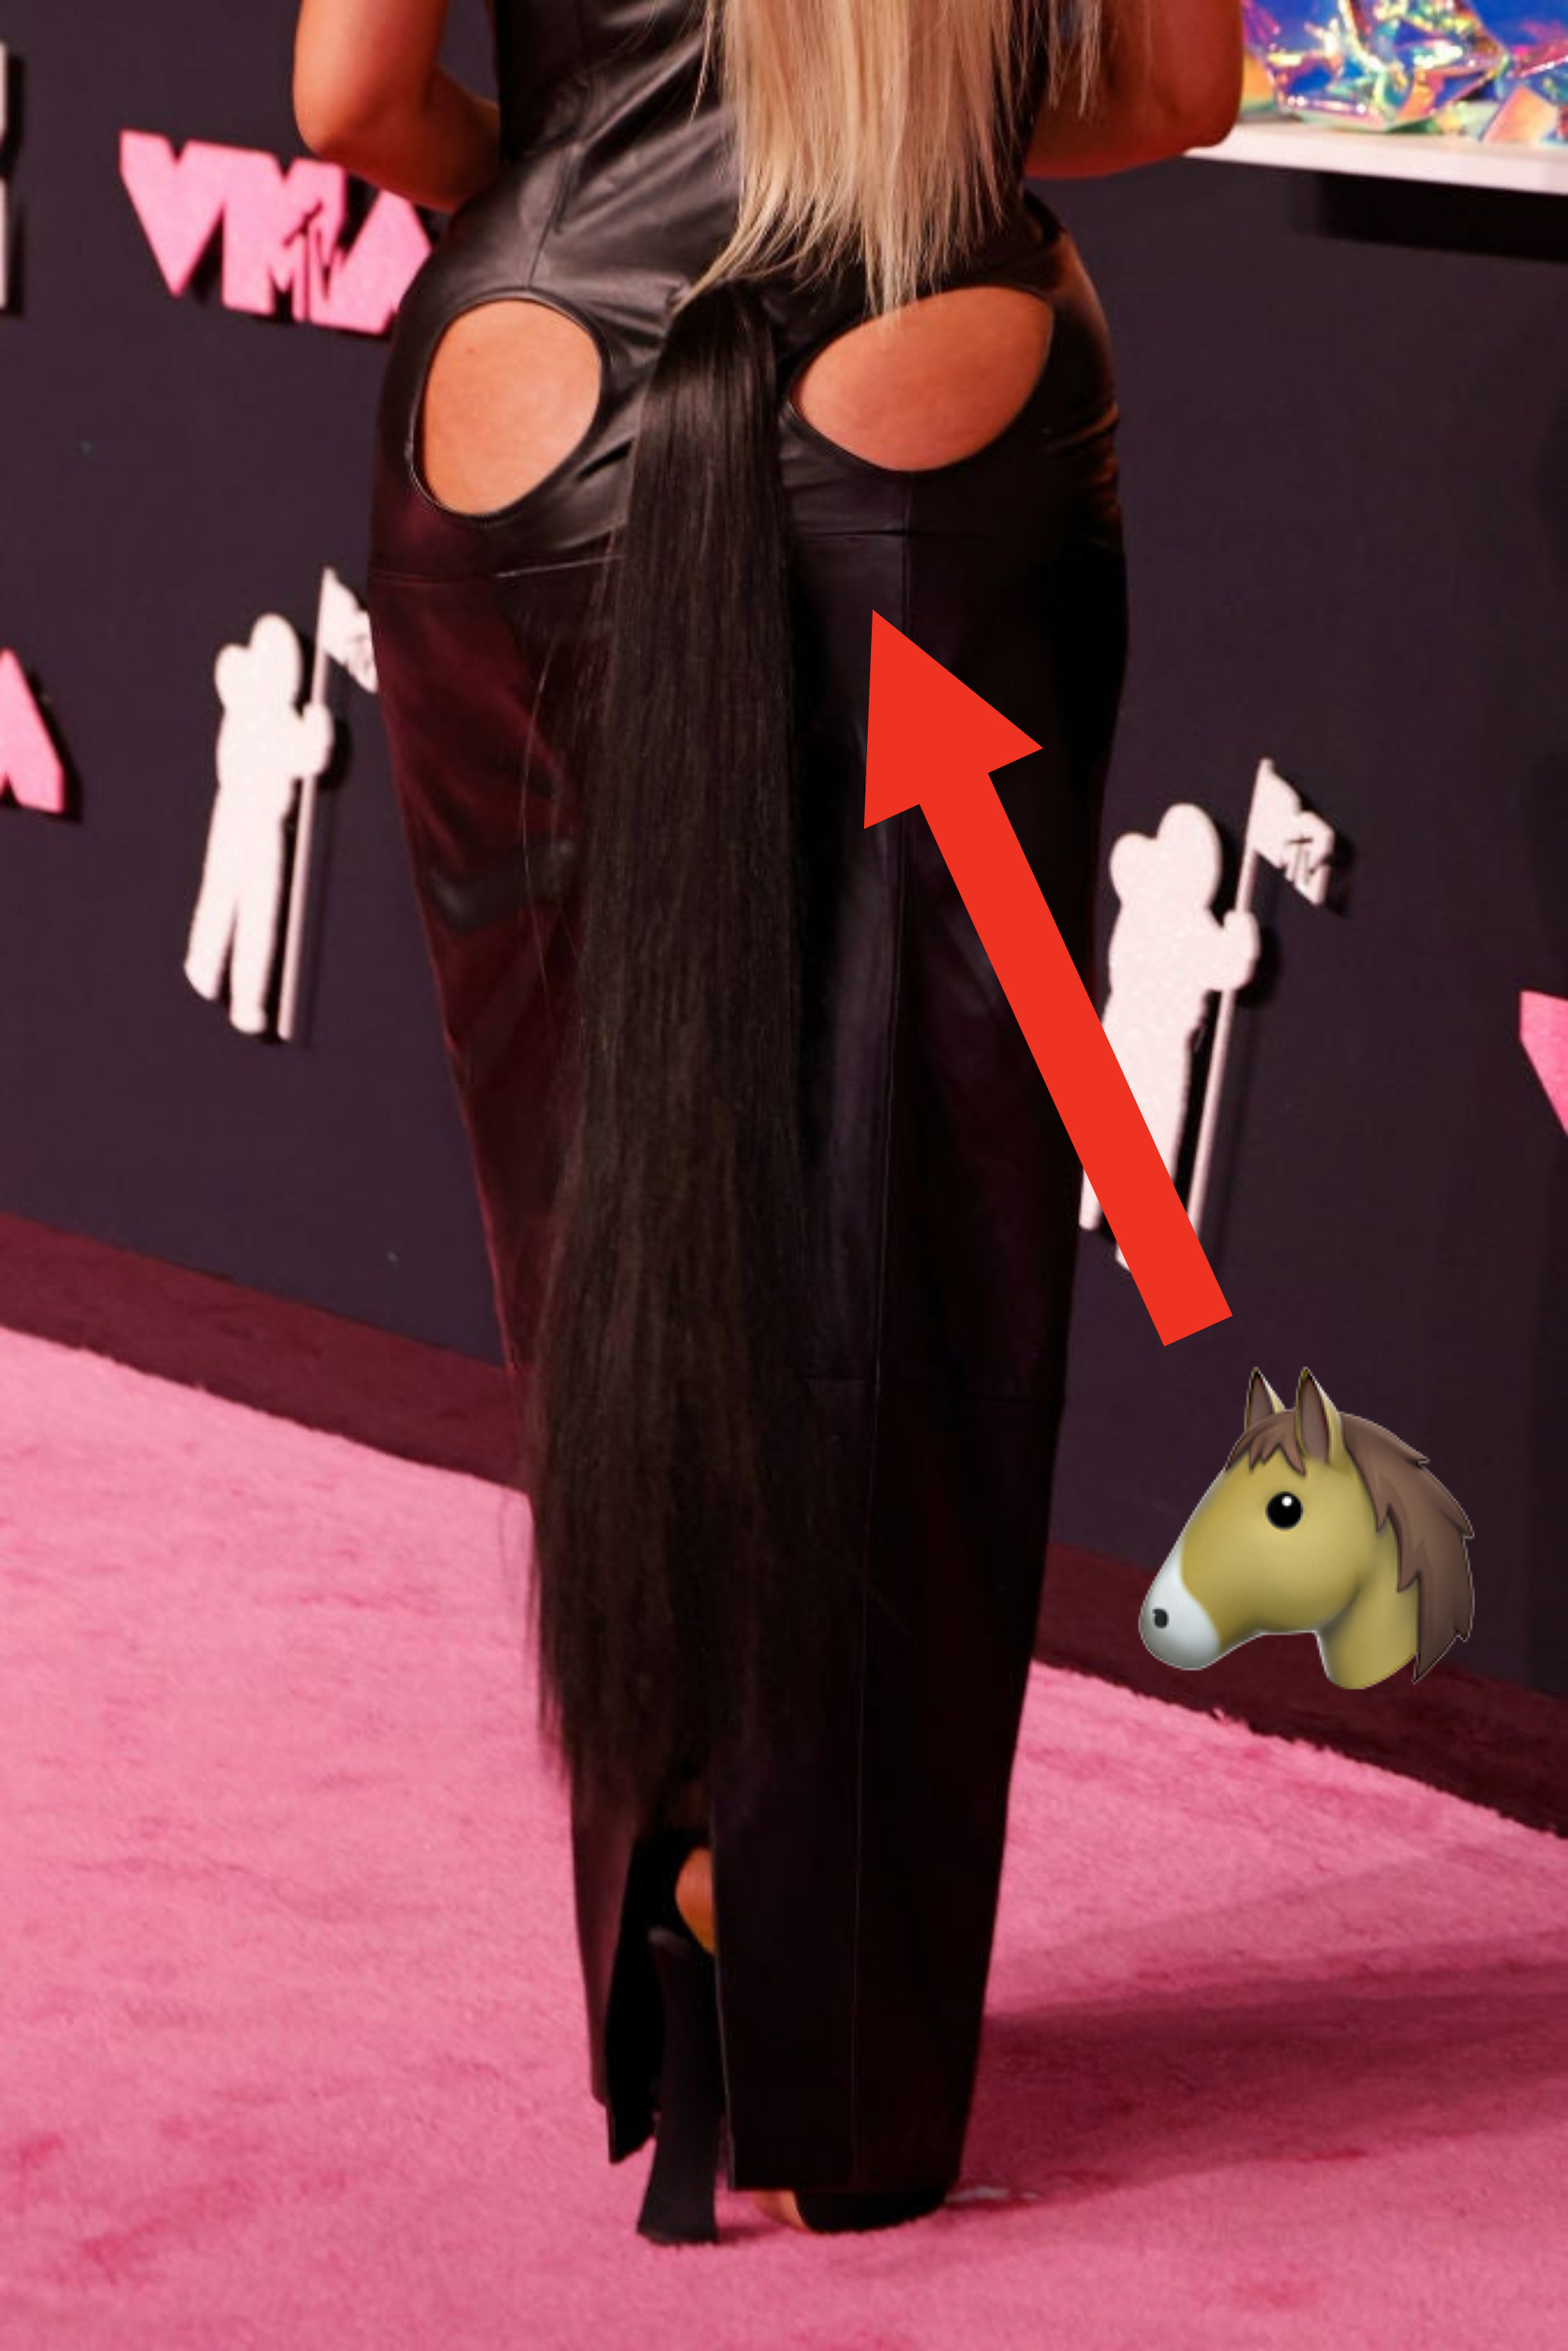 arrow pointing to the hair pony